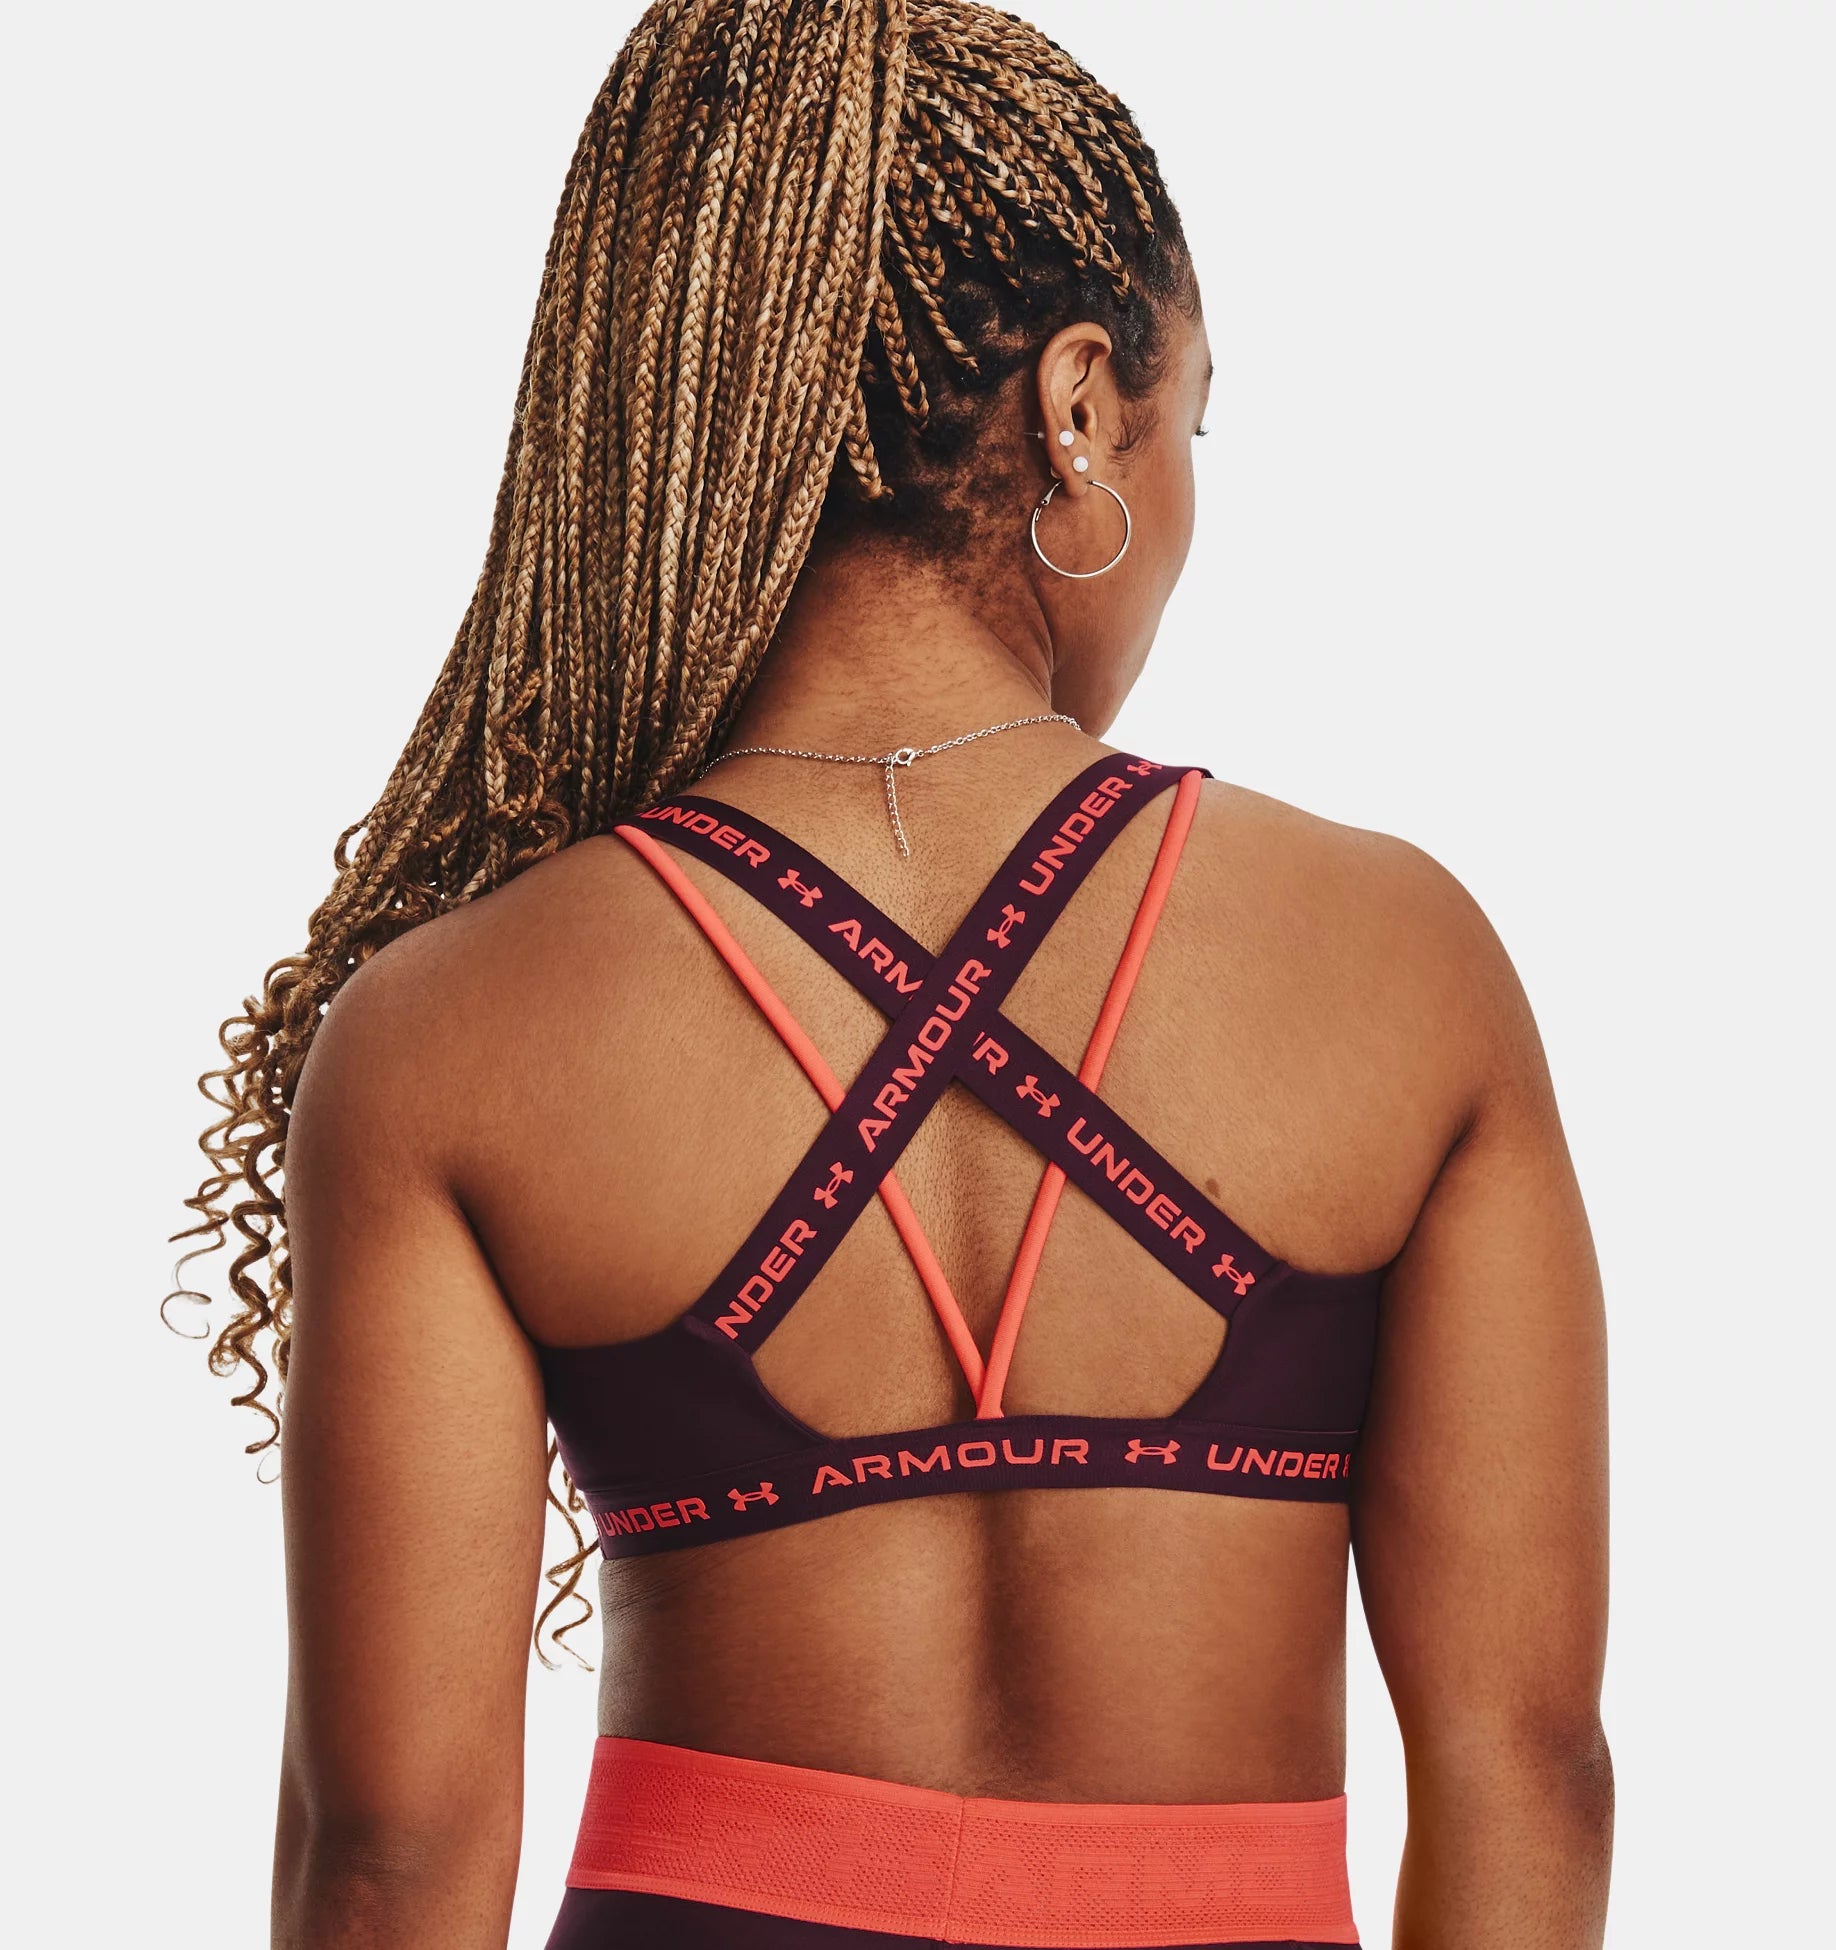 Sixs - Reinforced sports bra with colored Carbon Underwear